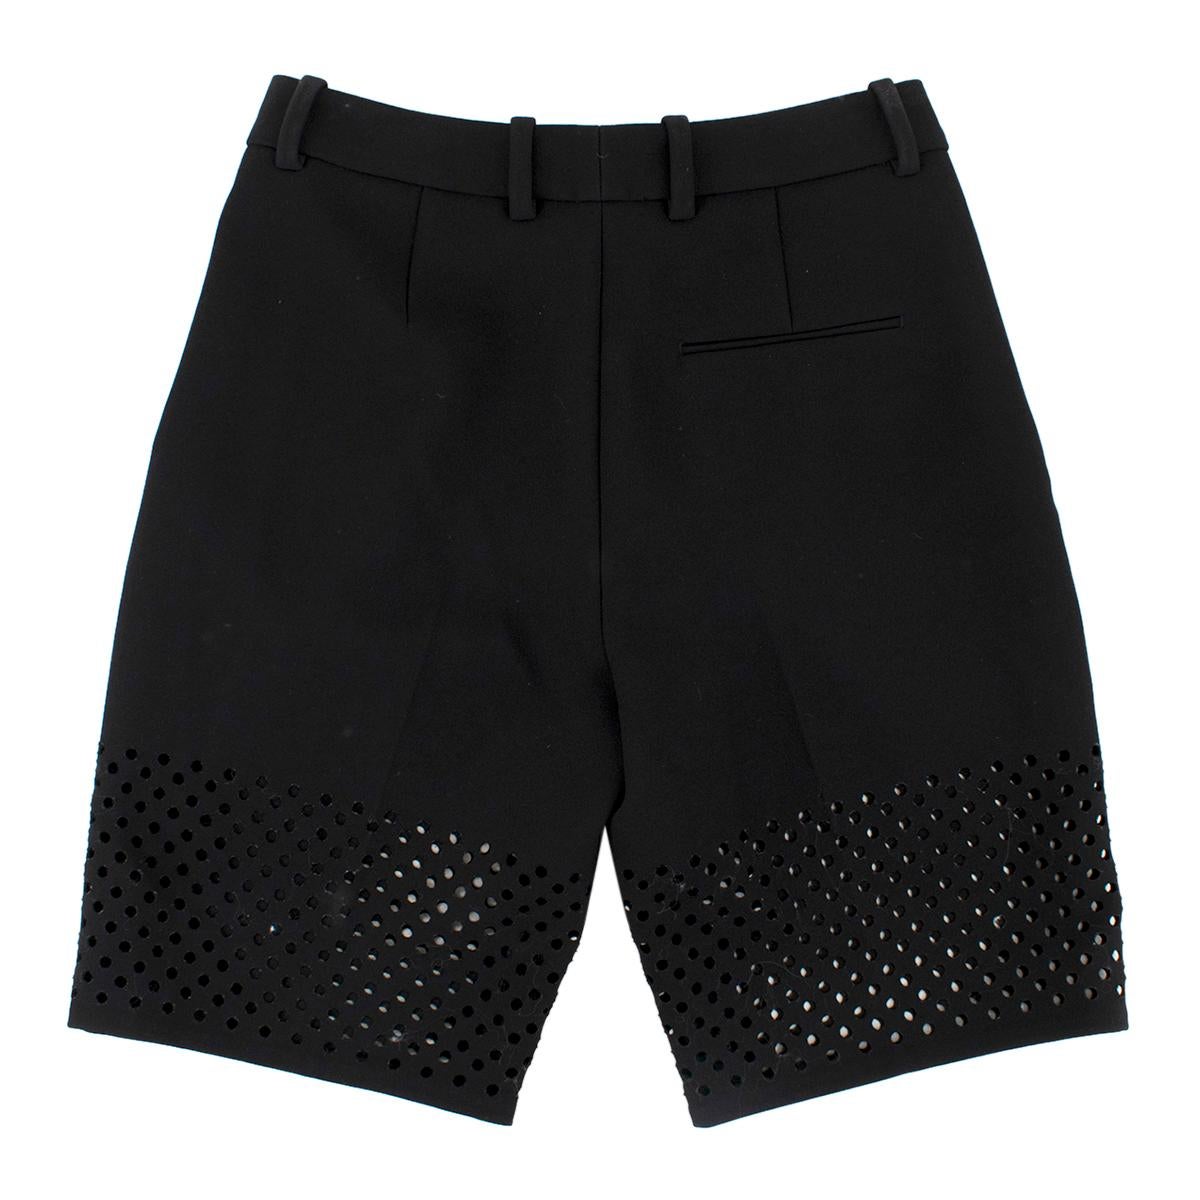 Phillip Lim Black Lasercut Bermuda Shorts

- Black bermuda shorts 
- Laser cut outs to the bottom 
- Zip, button and hooks fastening to the middle front
- Lined
- Belt hoops

Please note, these items are pre-owned and may show some signs of storage,